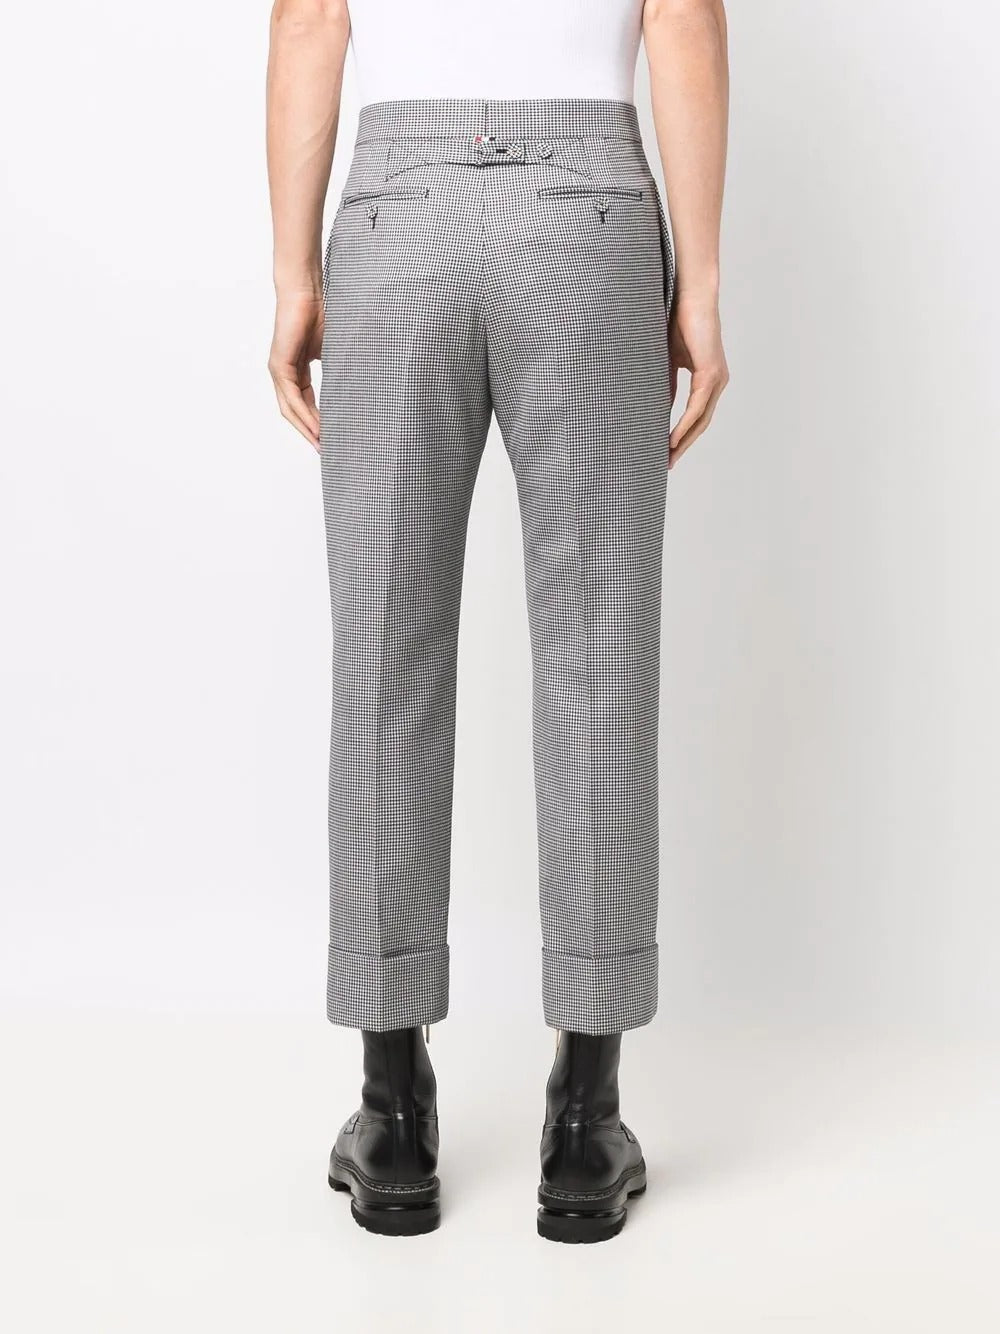 Thom Browne Houndstooth Backstrap Trousers Black 4